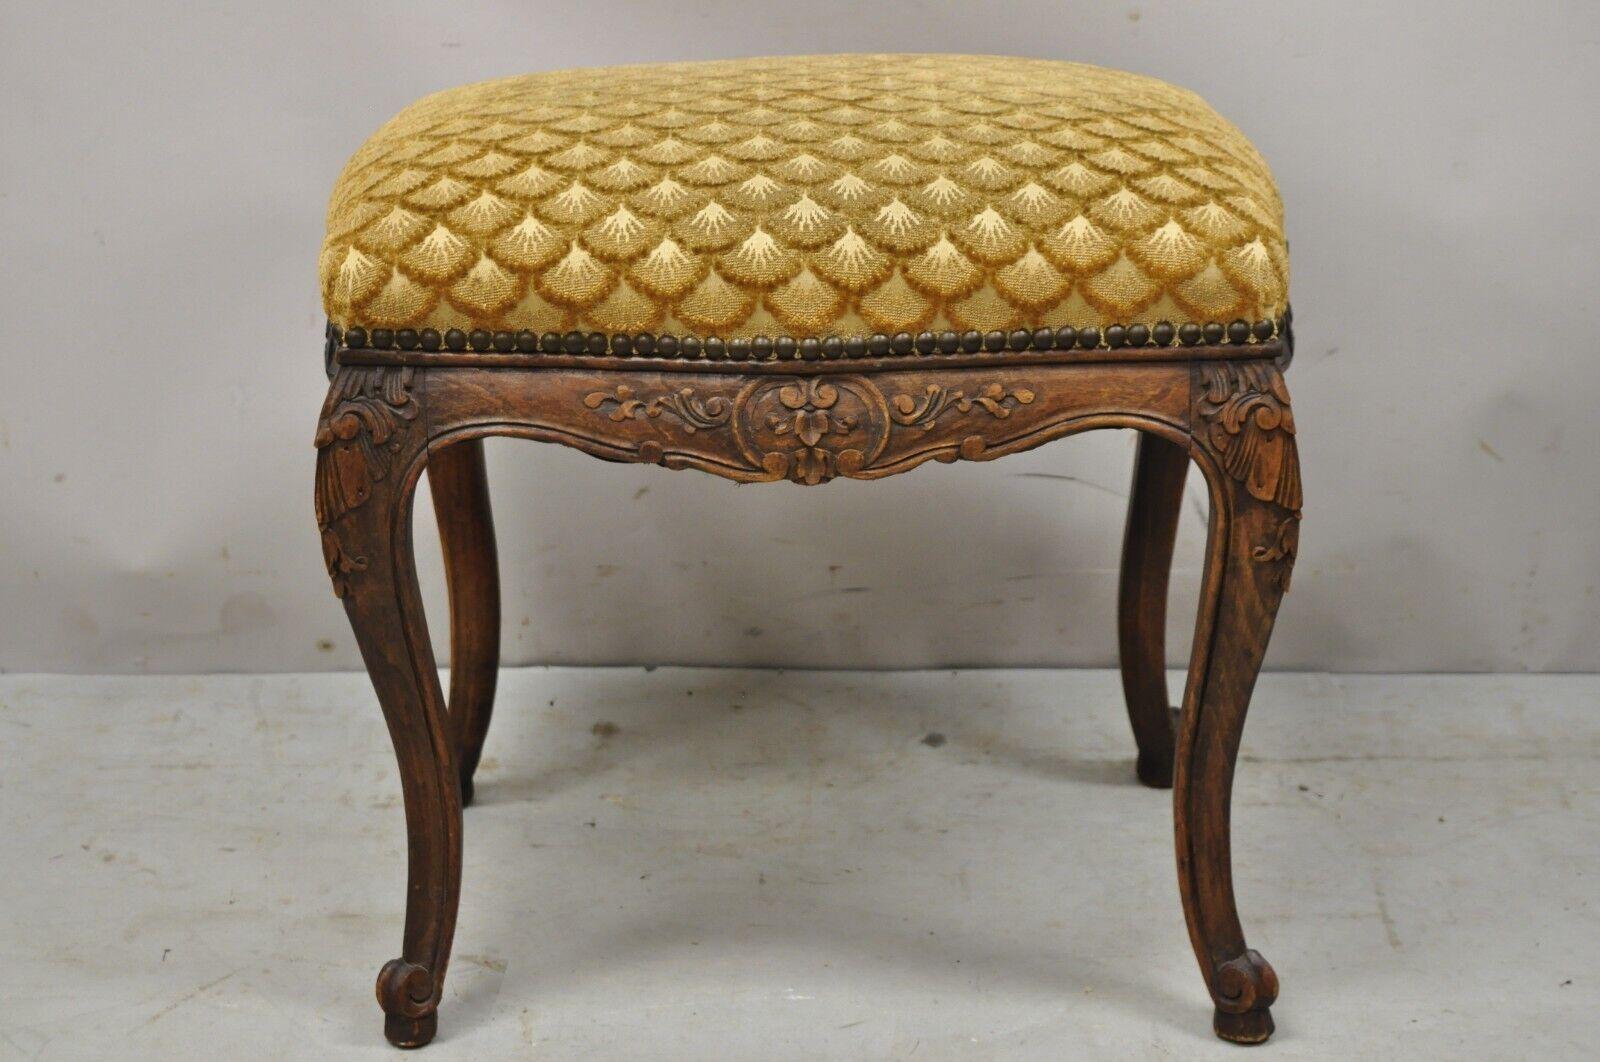 20th Century Antique French Louis XV Style Carved Walnut Orange Footstool Ottoman